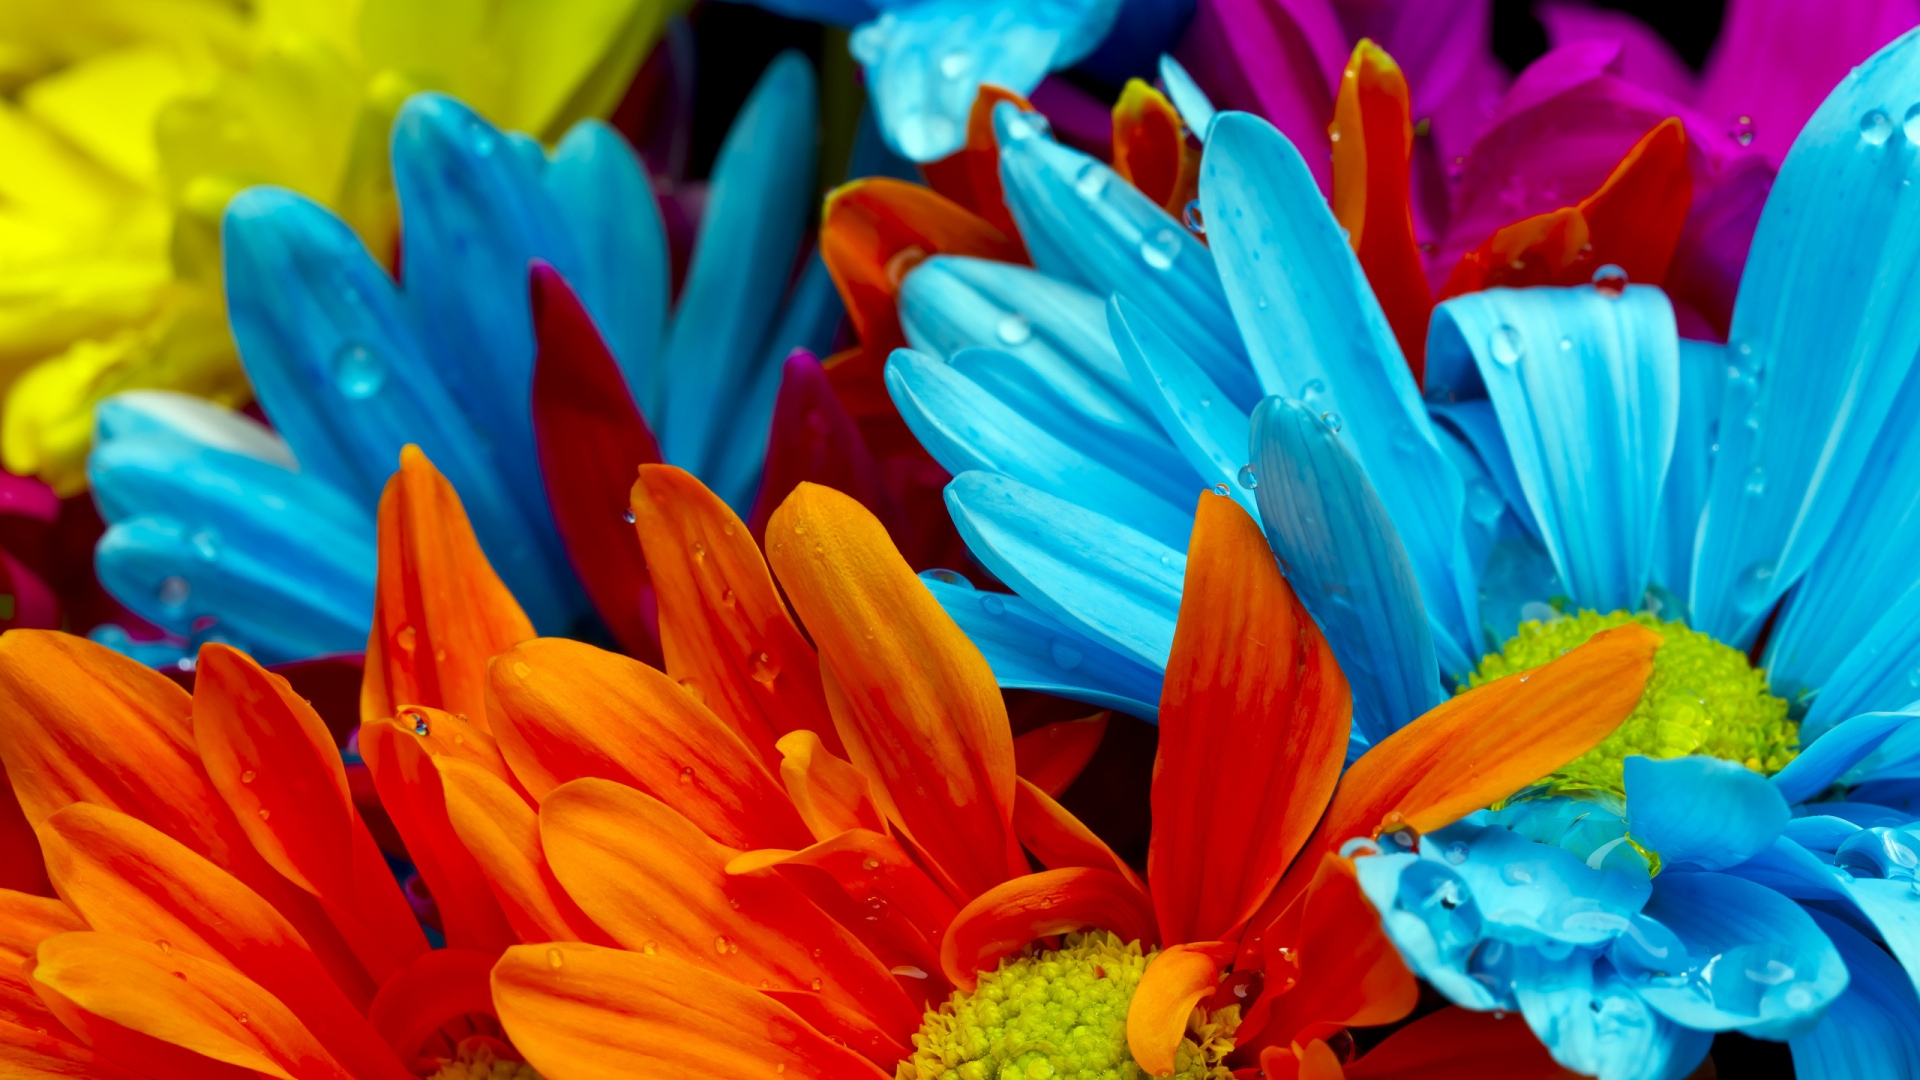 Colourful Gerbera Flowers Wallpaper - Red Orange And Blue Flowers , HD Wallpaper & Backgrounds